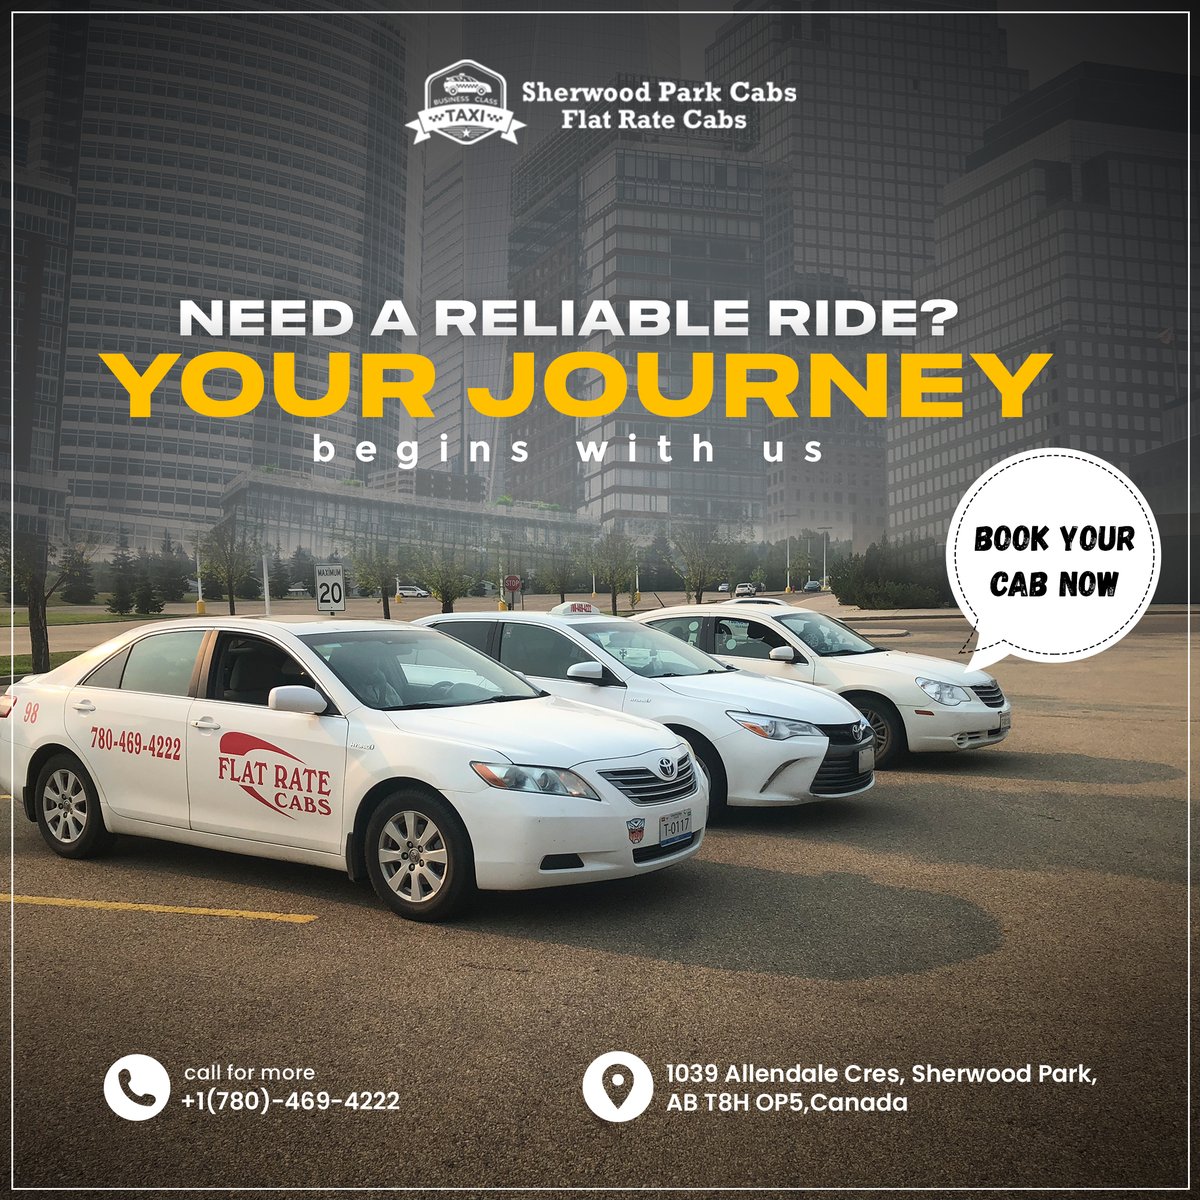 NEED A RELIABLE RIDE?
Your Journey begins with us!

BOOK NOW!
☎ +1(780)-469-4222

#reliableride #journeywithus #ReliableTransport #TravelWithUs #YourRideAwaits #HassleFreeTravel #AffordableRates #SmoothRides #BestTaxiService #SherwoodParkTaxi #flatratecabs #sherwoodparkcabs